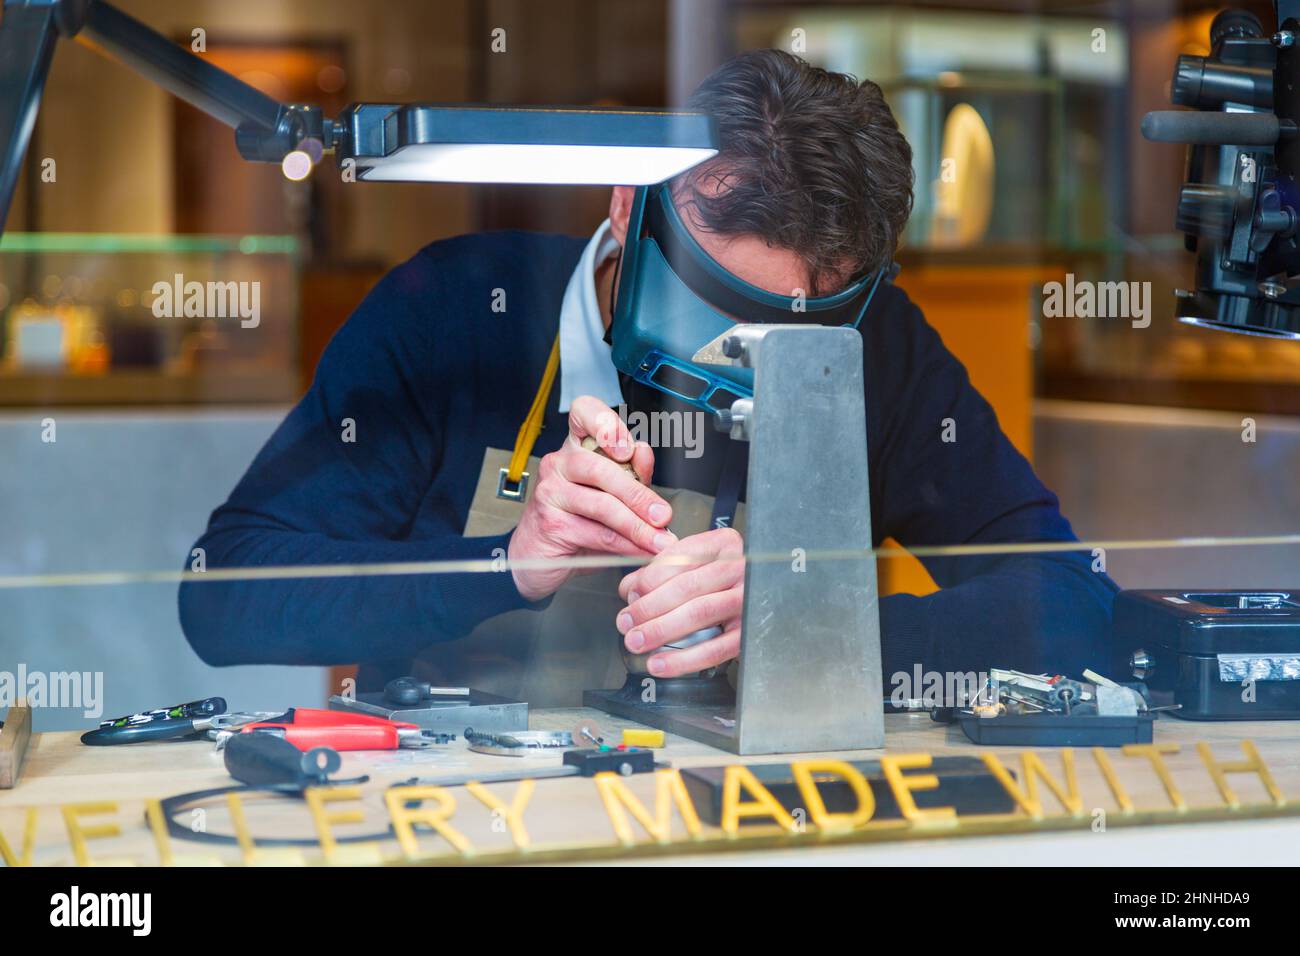 Jeweller carrying out repairs, london, uk Stock Photo